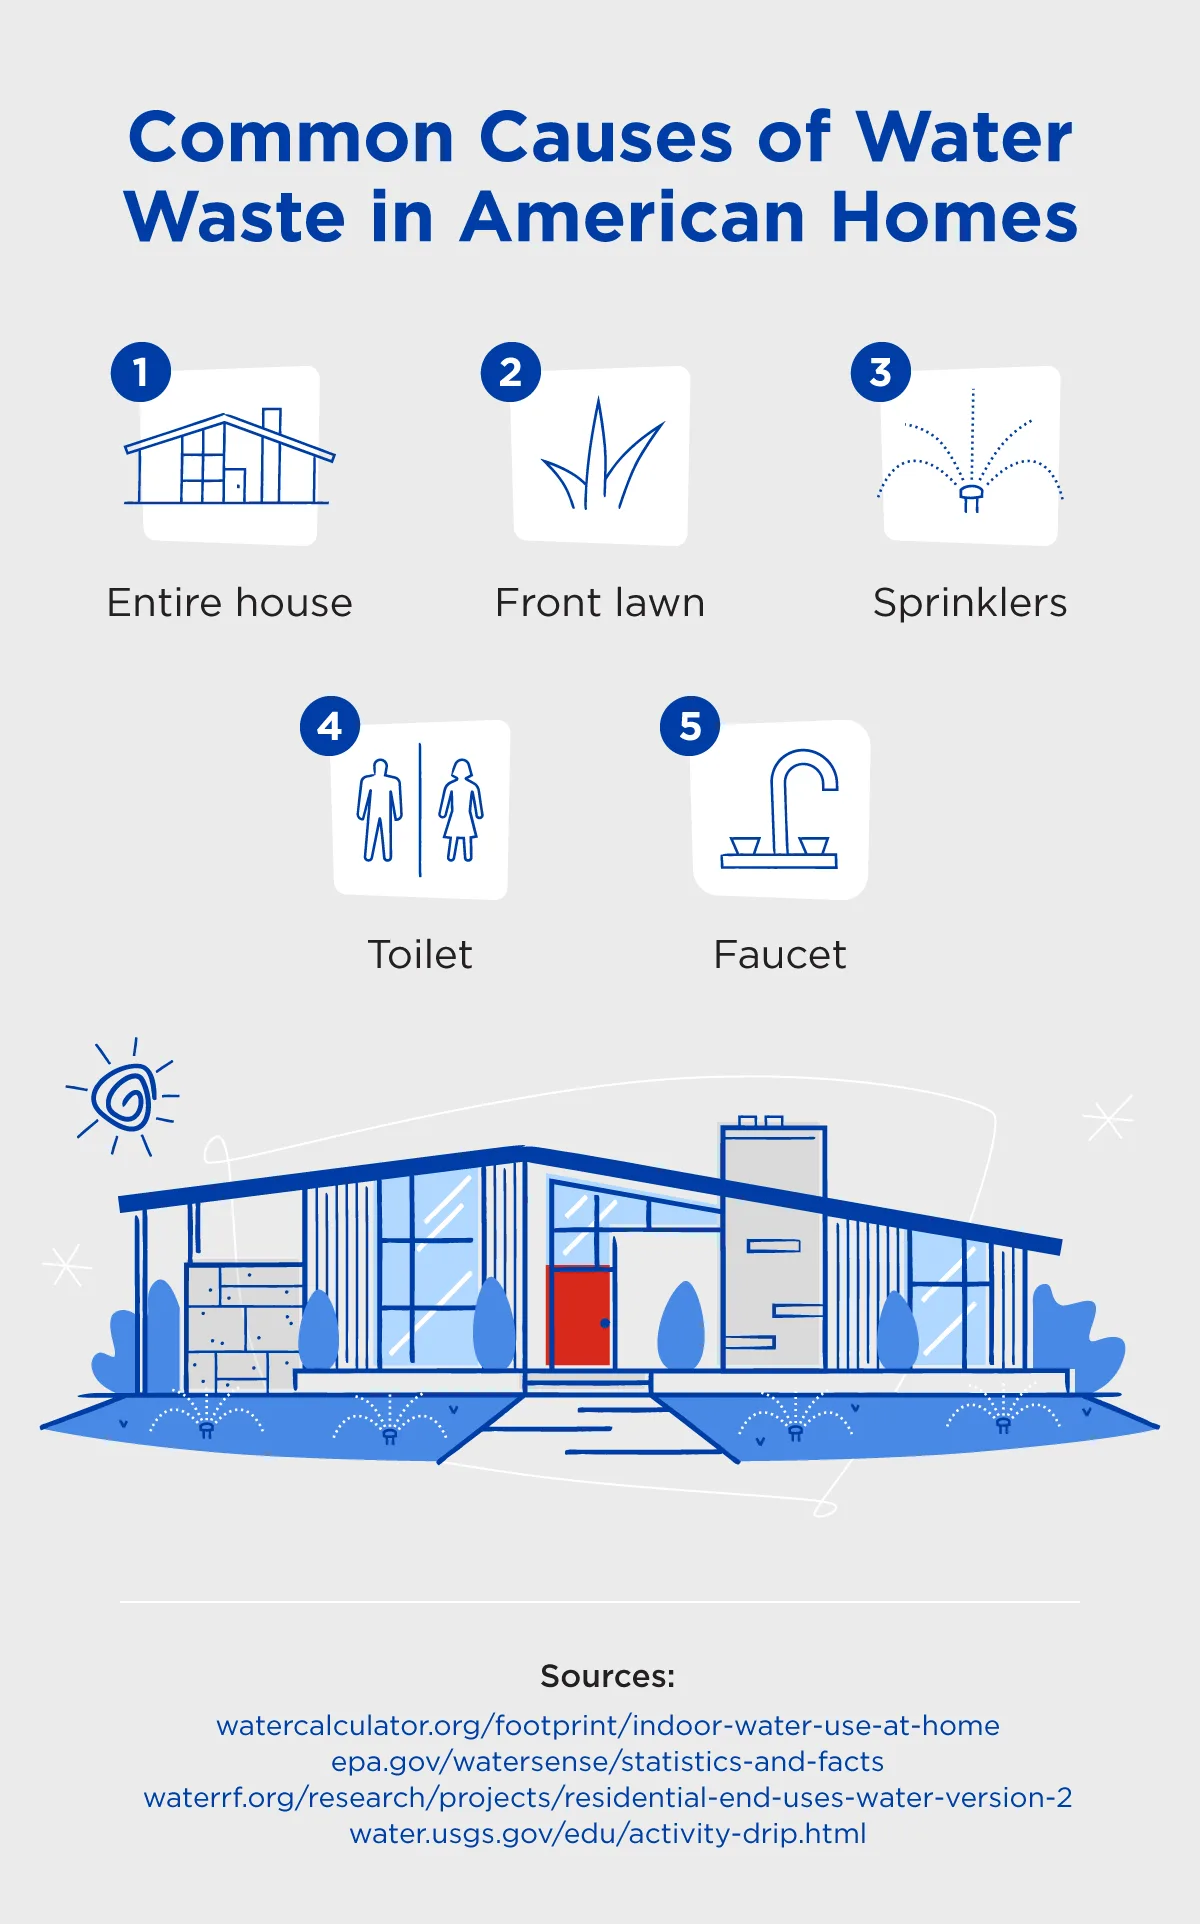 A graphic showing the most common causes of water waste in American homes.